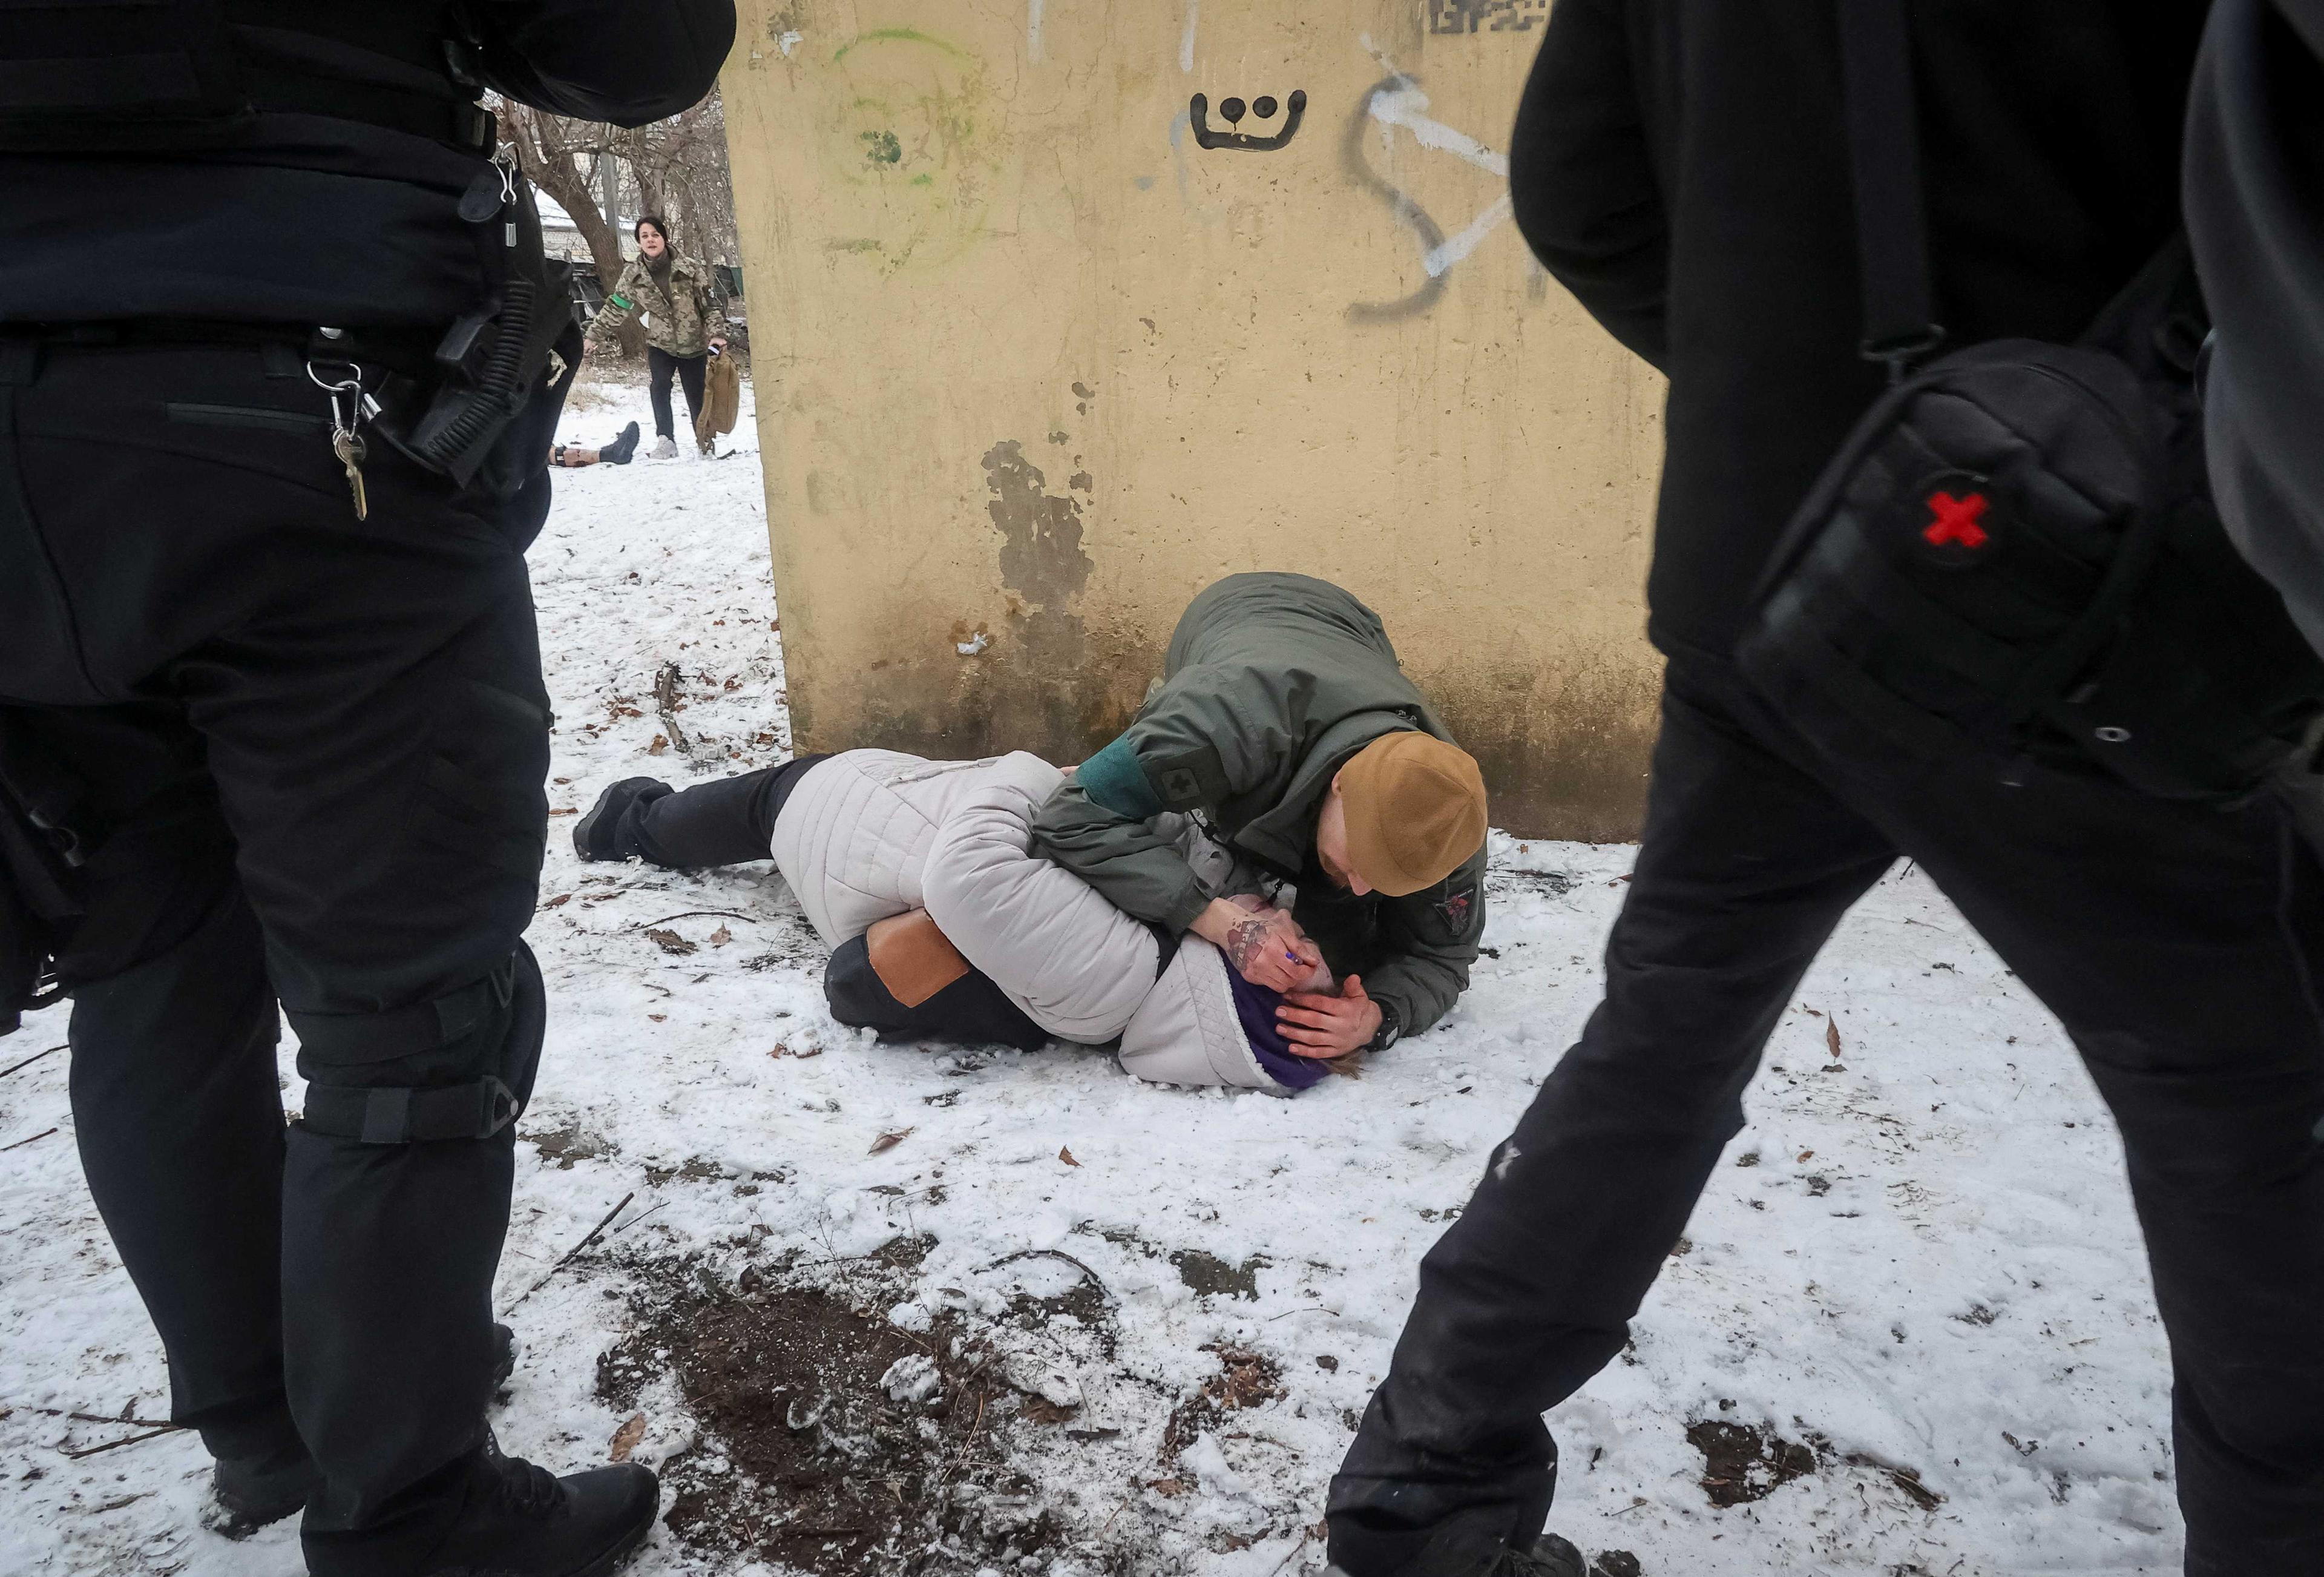 A serviceman treats a woman wounded by a Russian missile strike, amid Russia's attack on Ukraine, in Kramatorsk, Ukraine Feb 2. Photo: Reuters